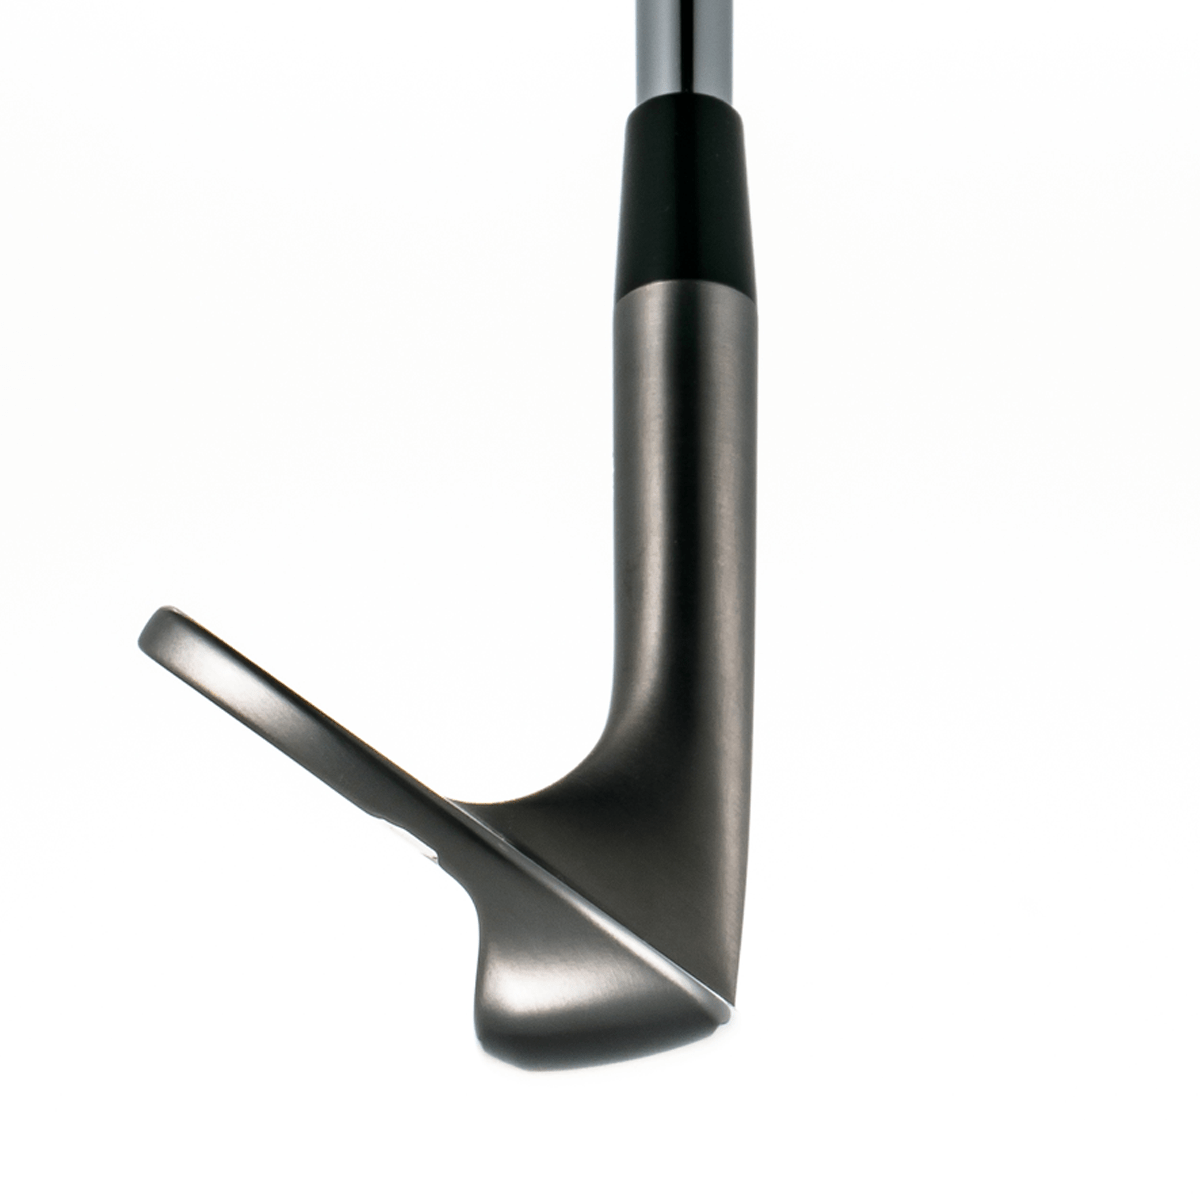 PROTOCONCEPT Golf, Forged Wedge - 13